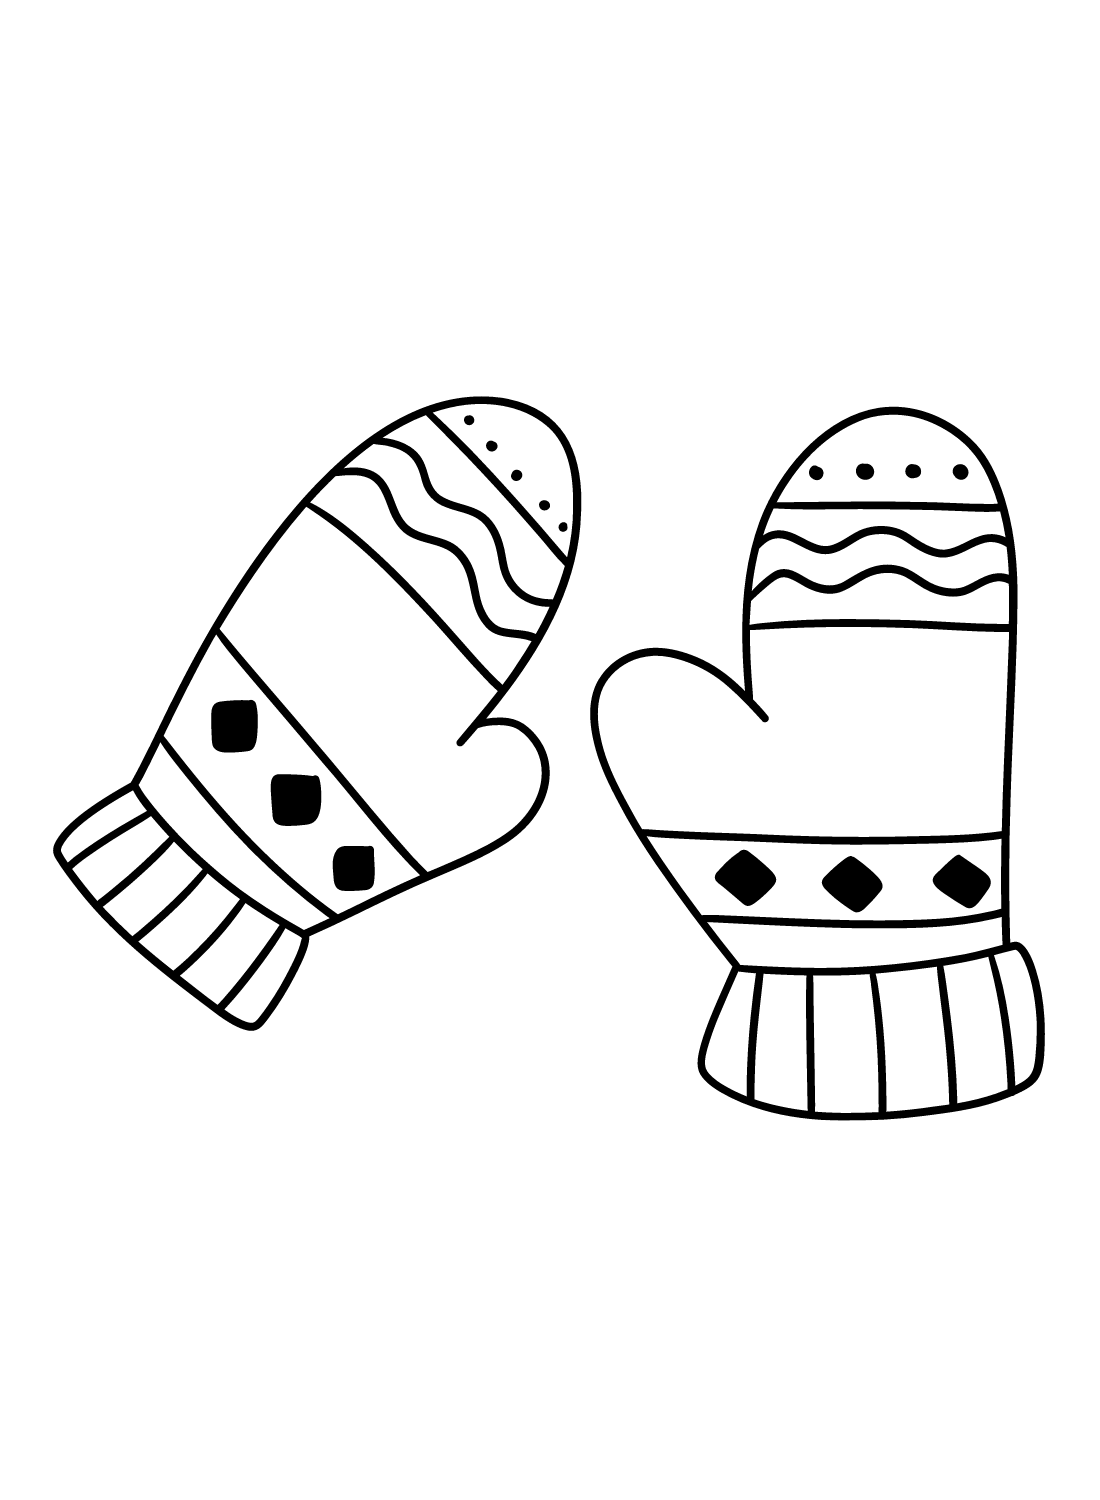 Printable Mittens Free Coloring Page